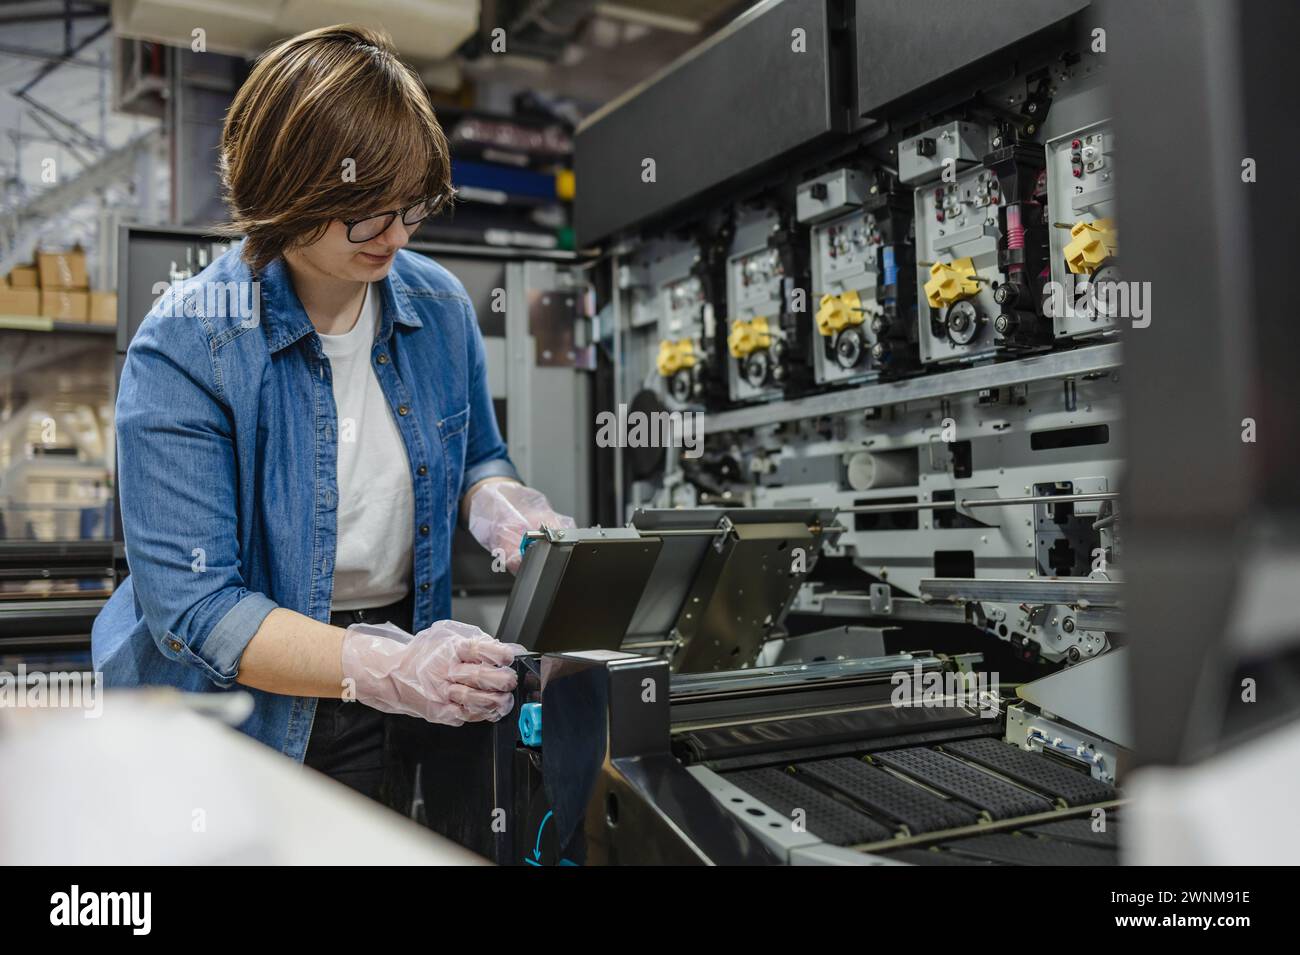 Woman working in a printing factory Stock Photo